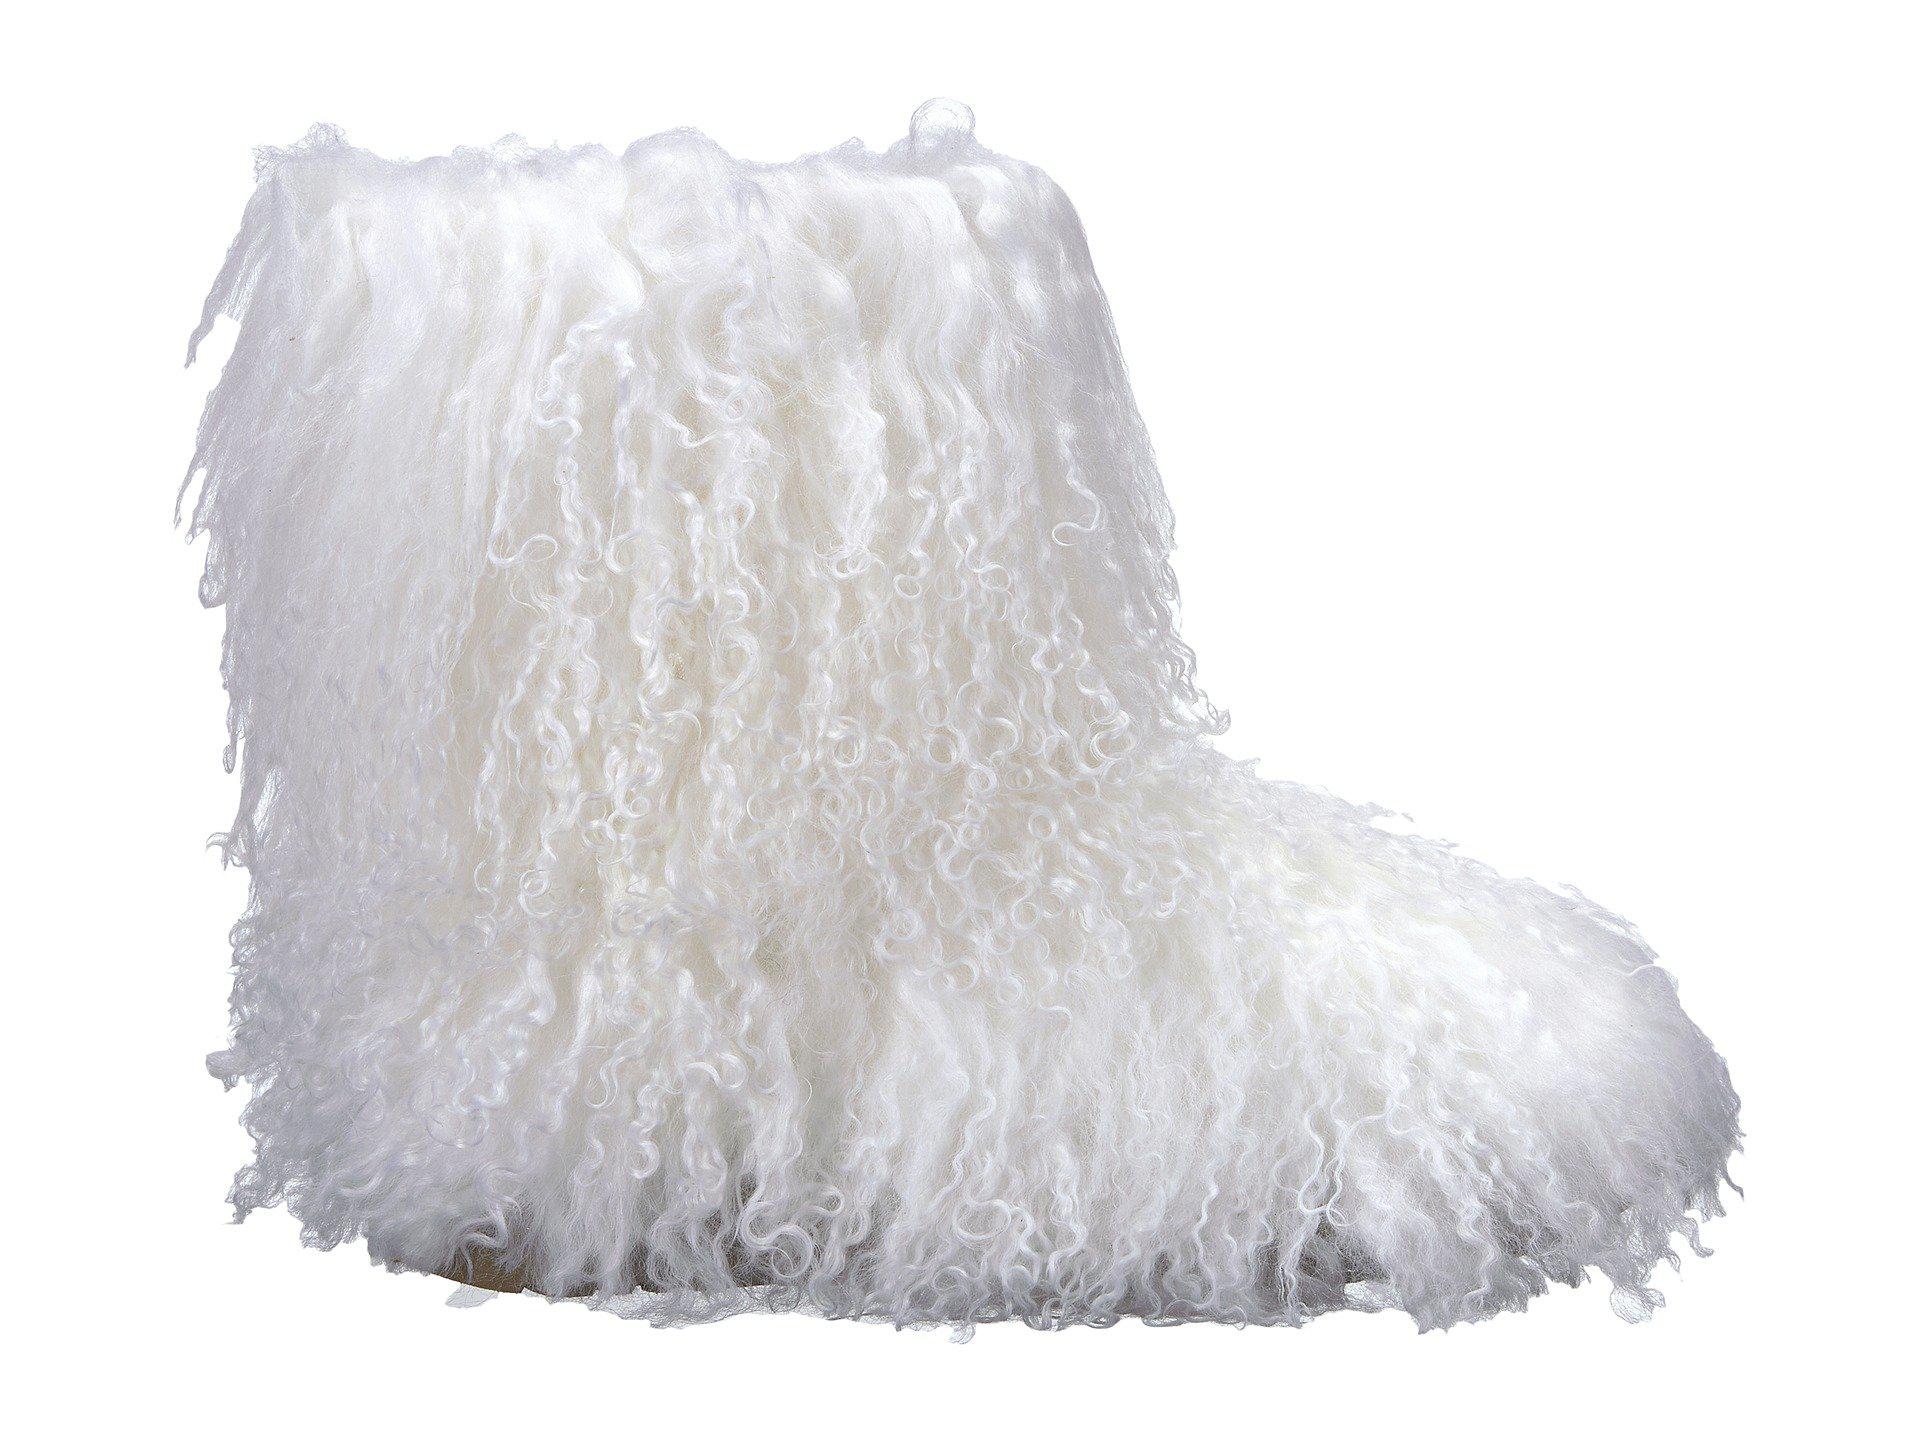 uggs fluff momma boots